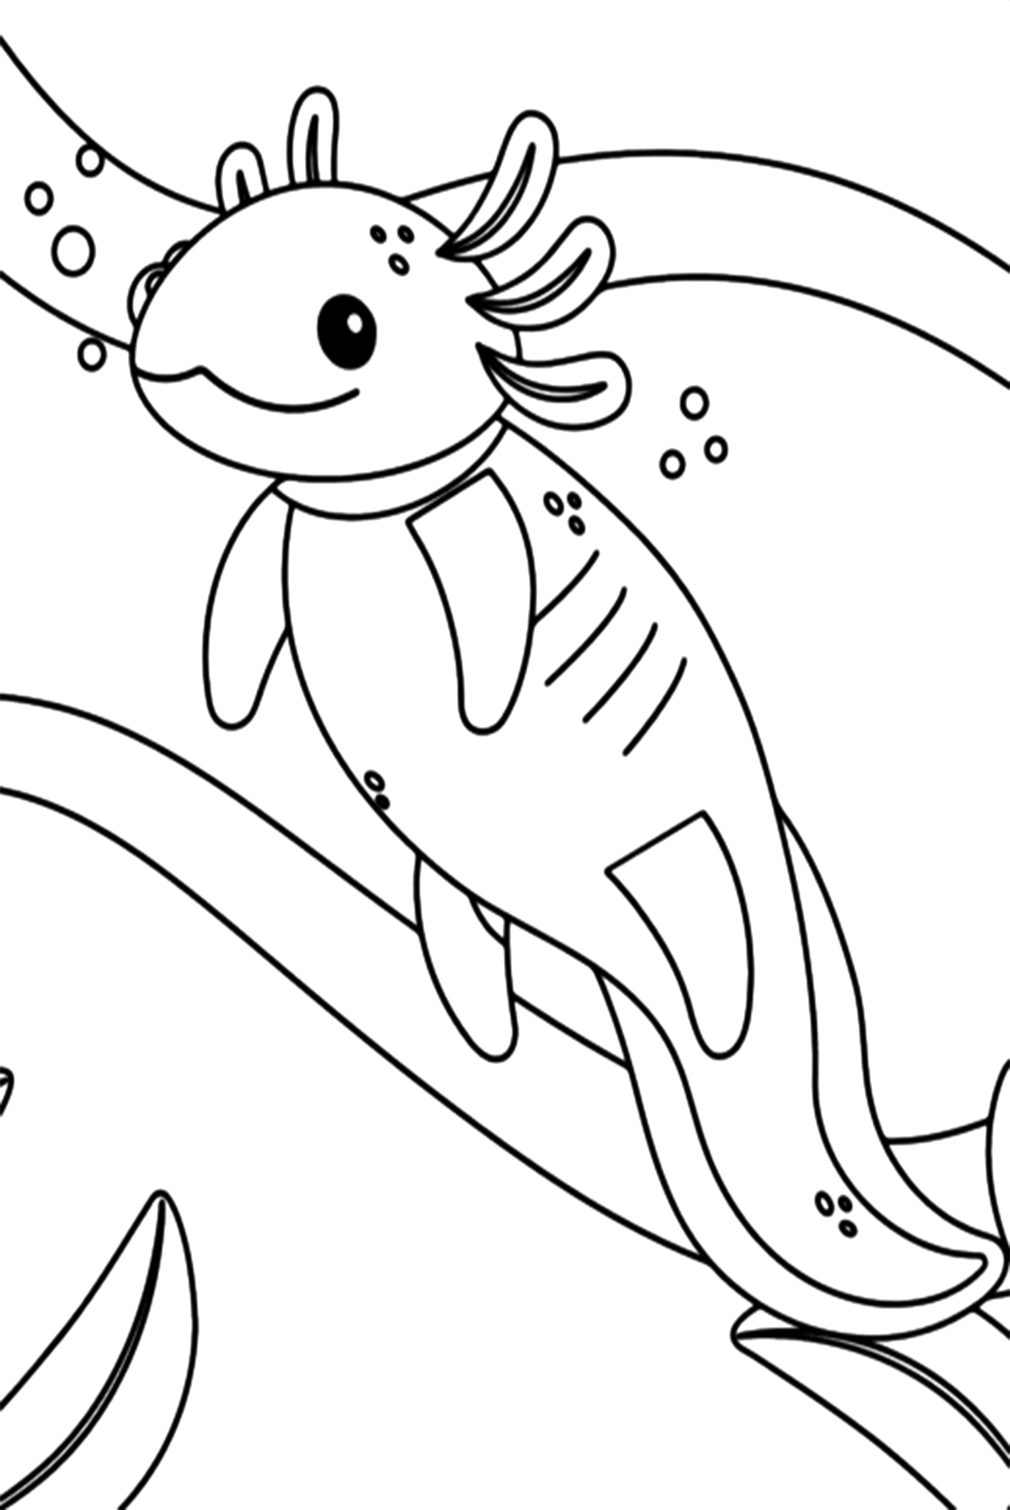 Lovely Axolotl for Kids Coloring Pages